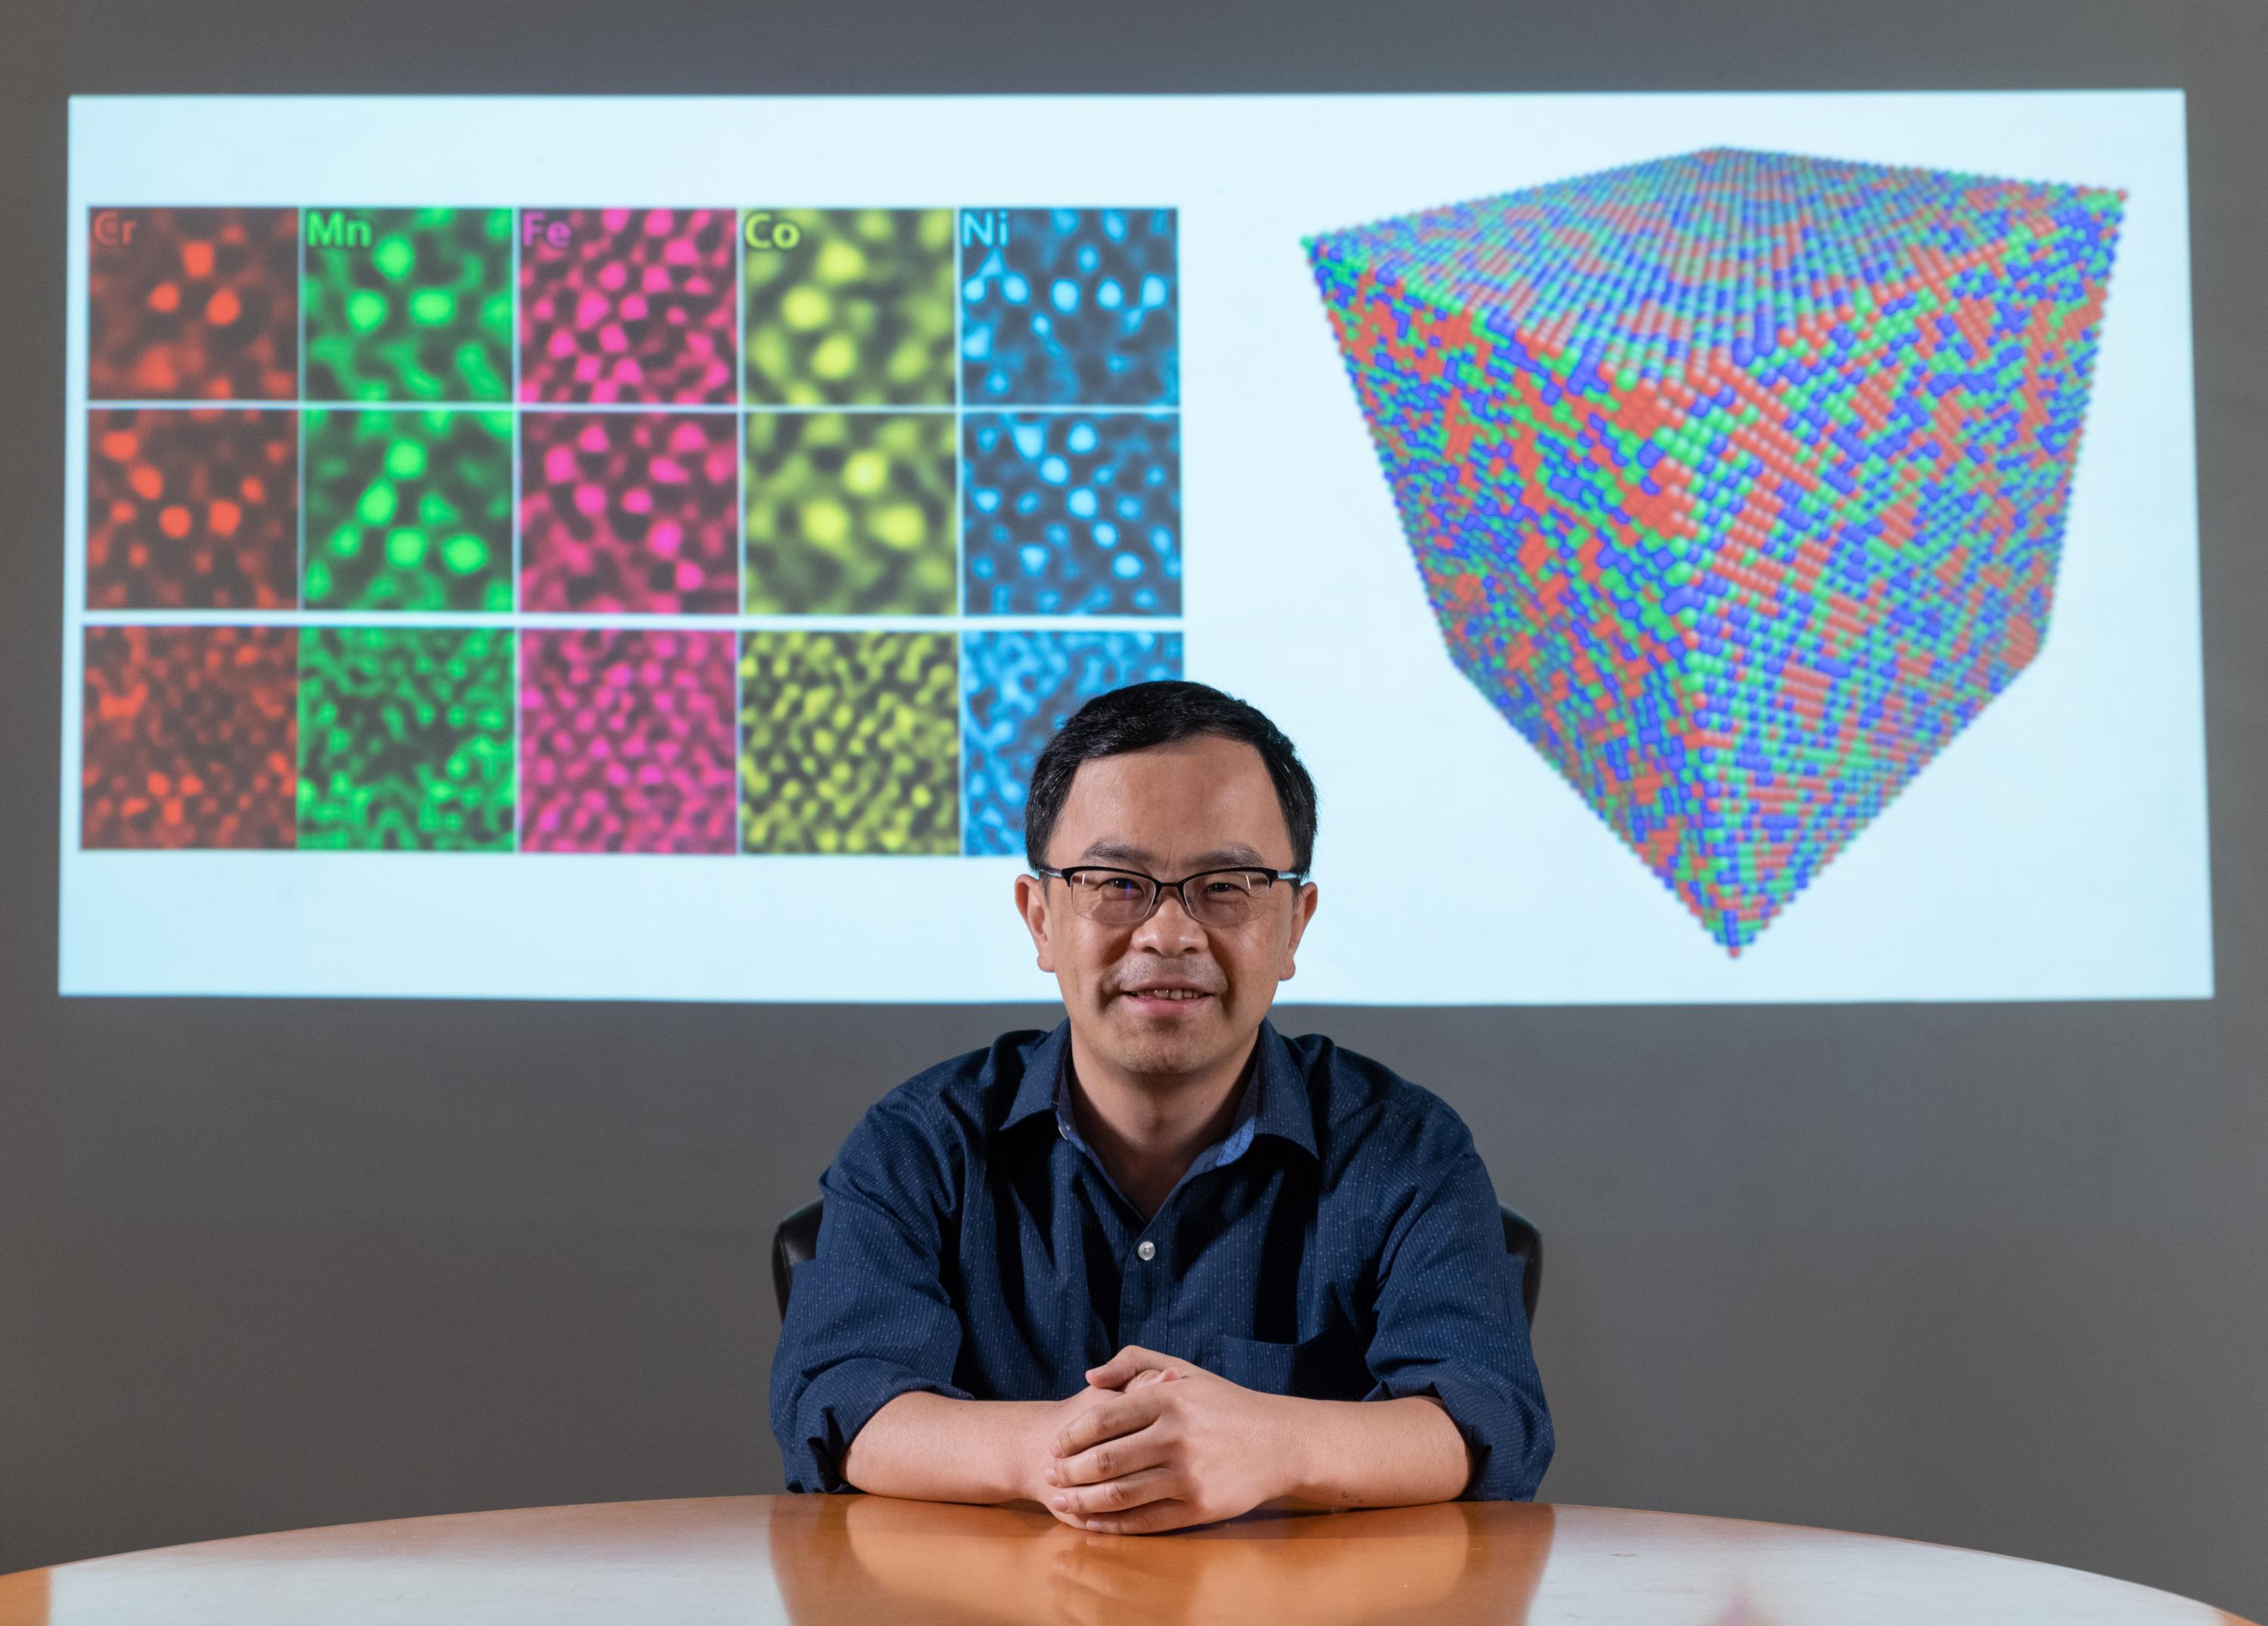  Professor Ting Zhu  investigates the mechanical behavior of advanced engineering materials and energy materials at the nano to macro-scale. We focus on materials modeling and simulations.